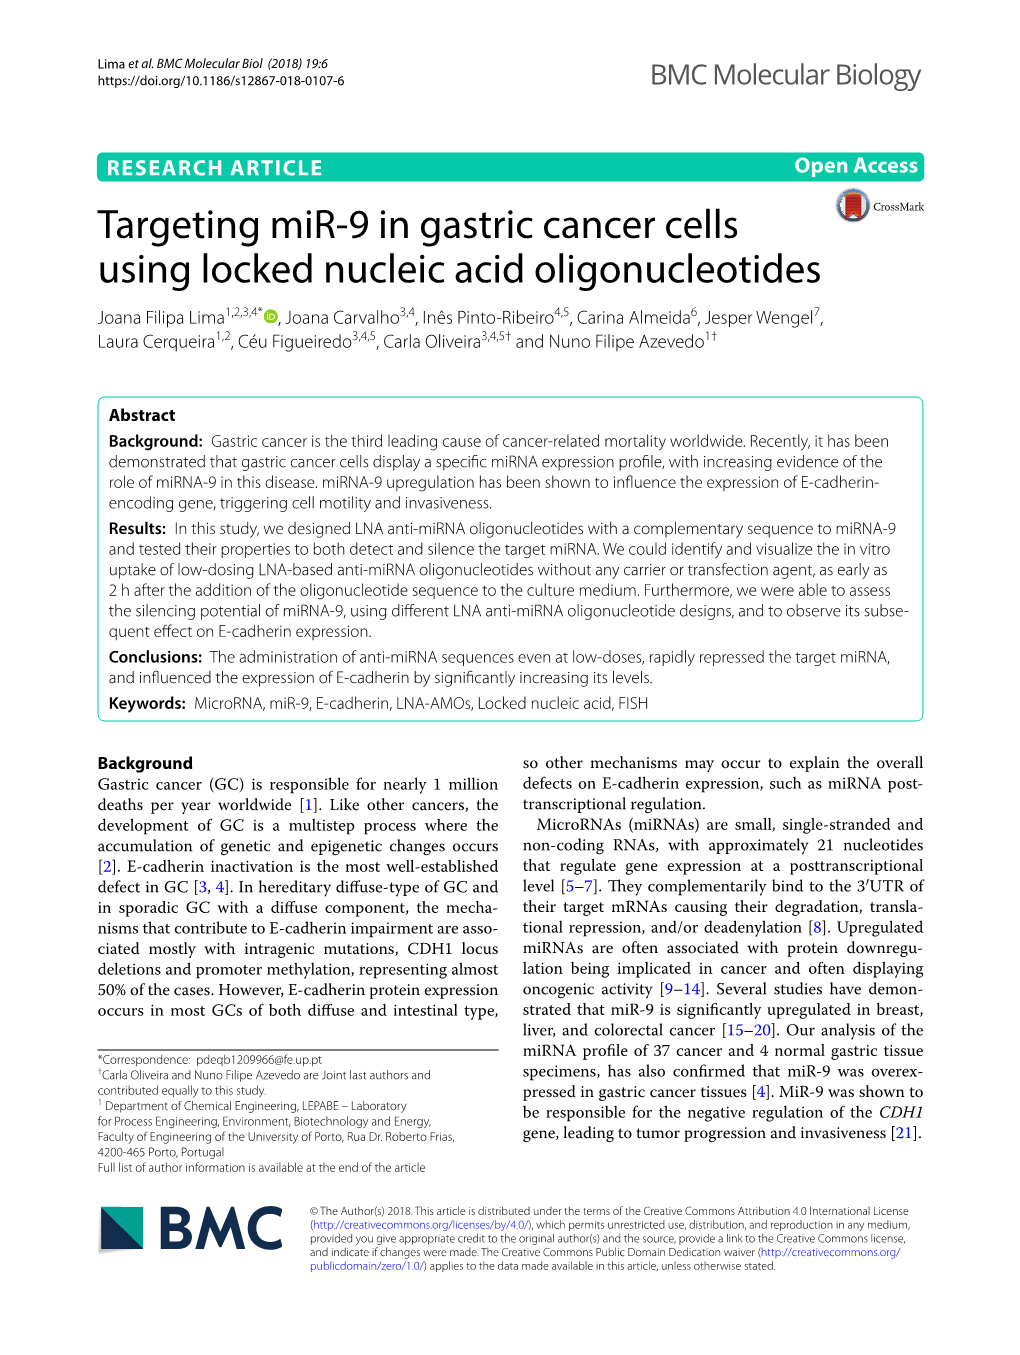 Targeting Mir-9 in Gastric Cancer Cells Using Locked Nucleic Acid Oligonucleotides